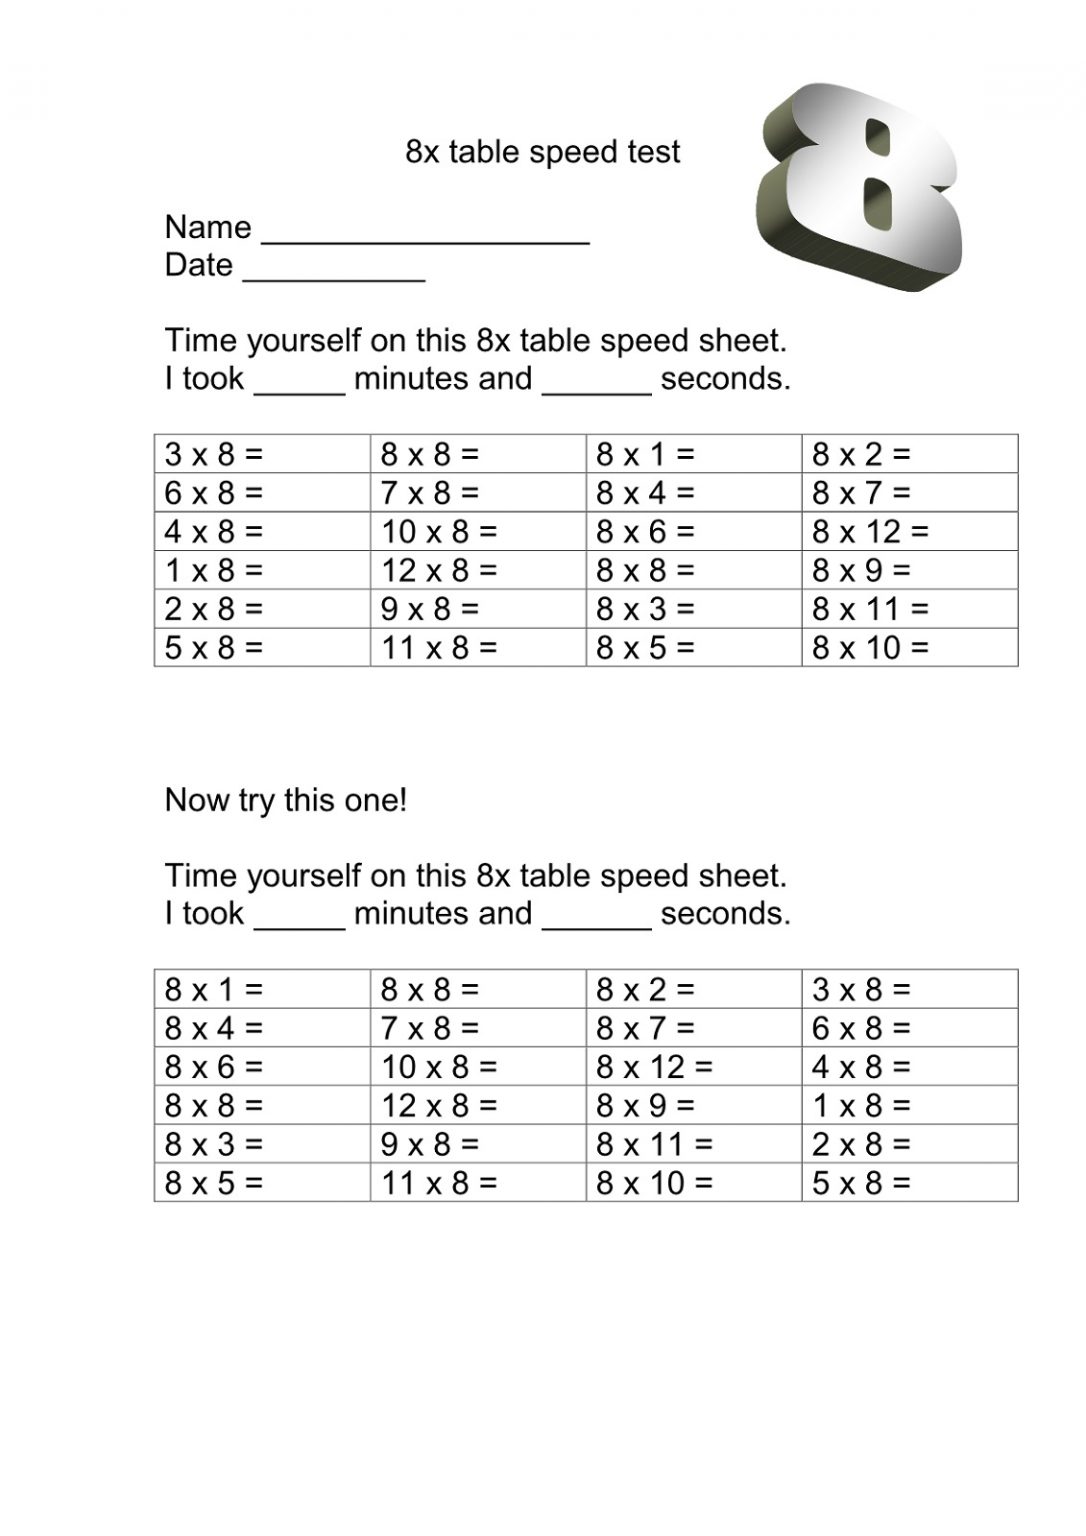 printable-8-times-table-worksheets-101-activity